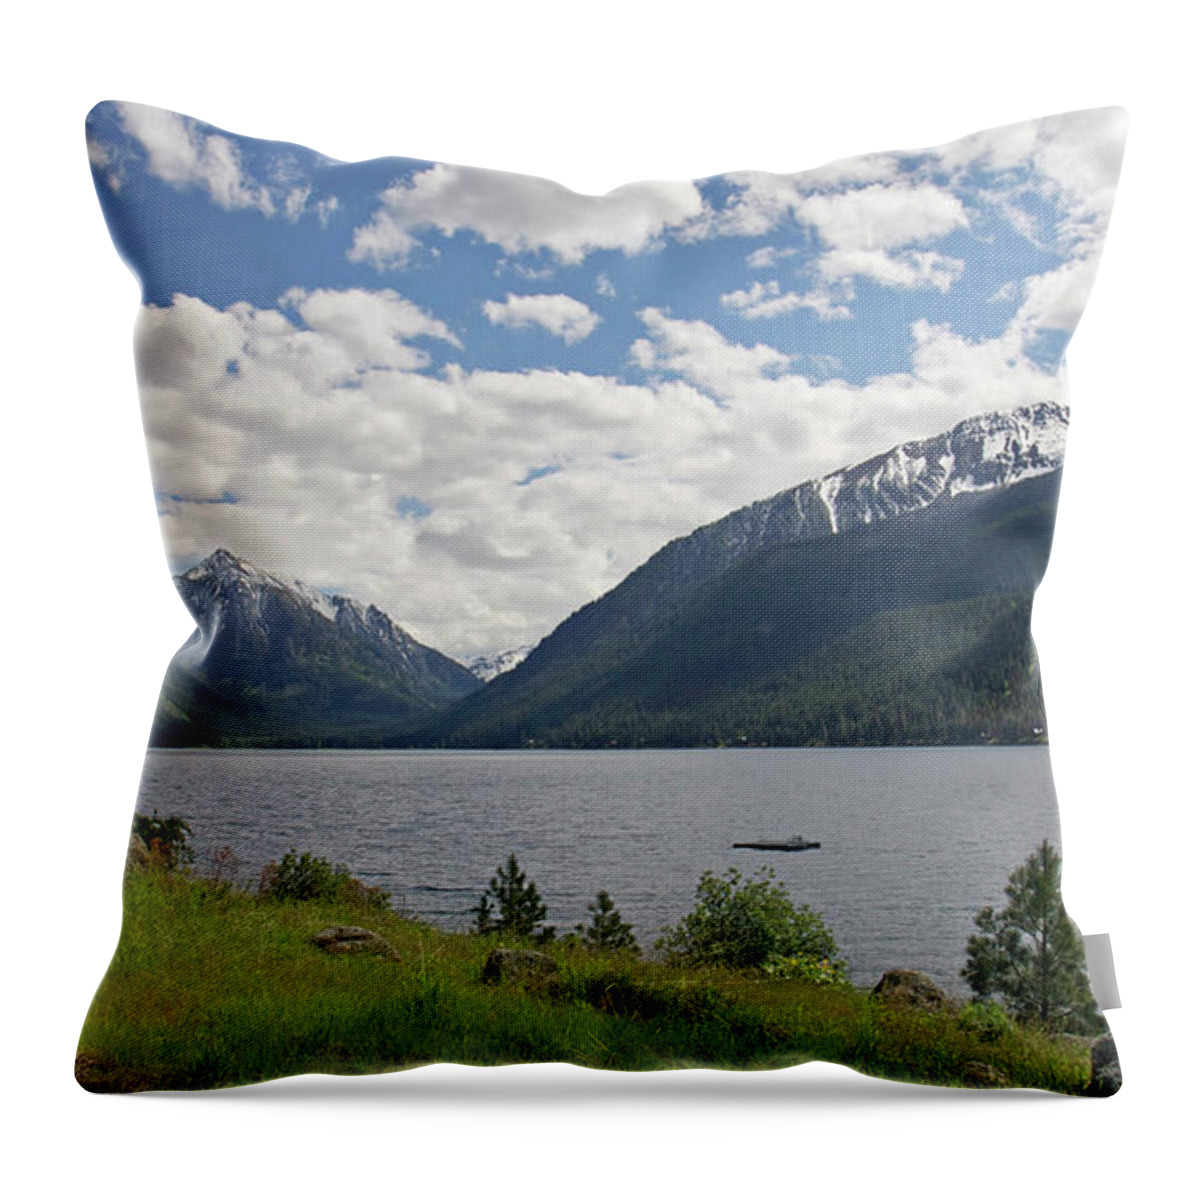 Scenics Throw Pillow featuring the photograph Wallowa Lake And Mountains by Bruceblock